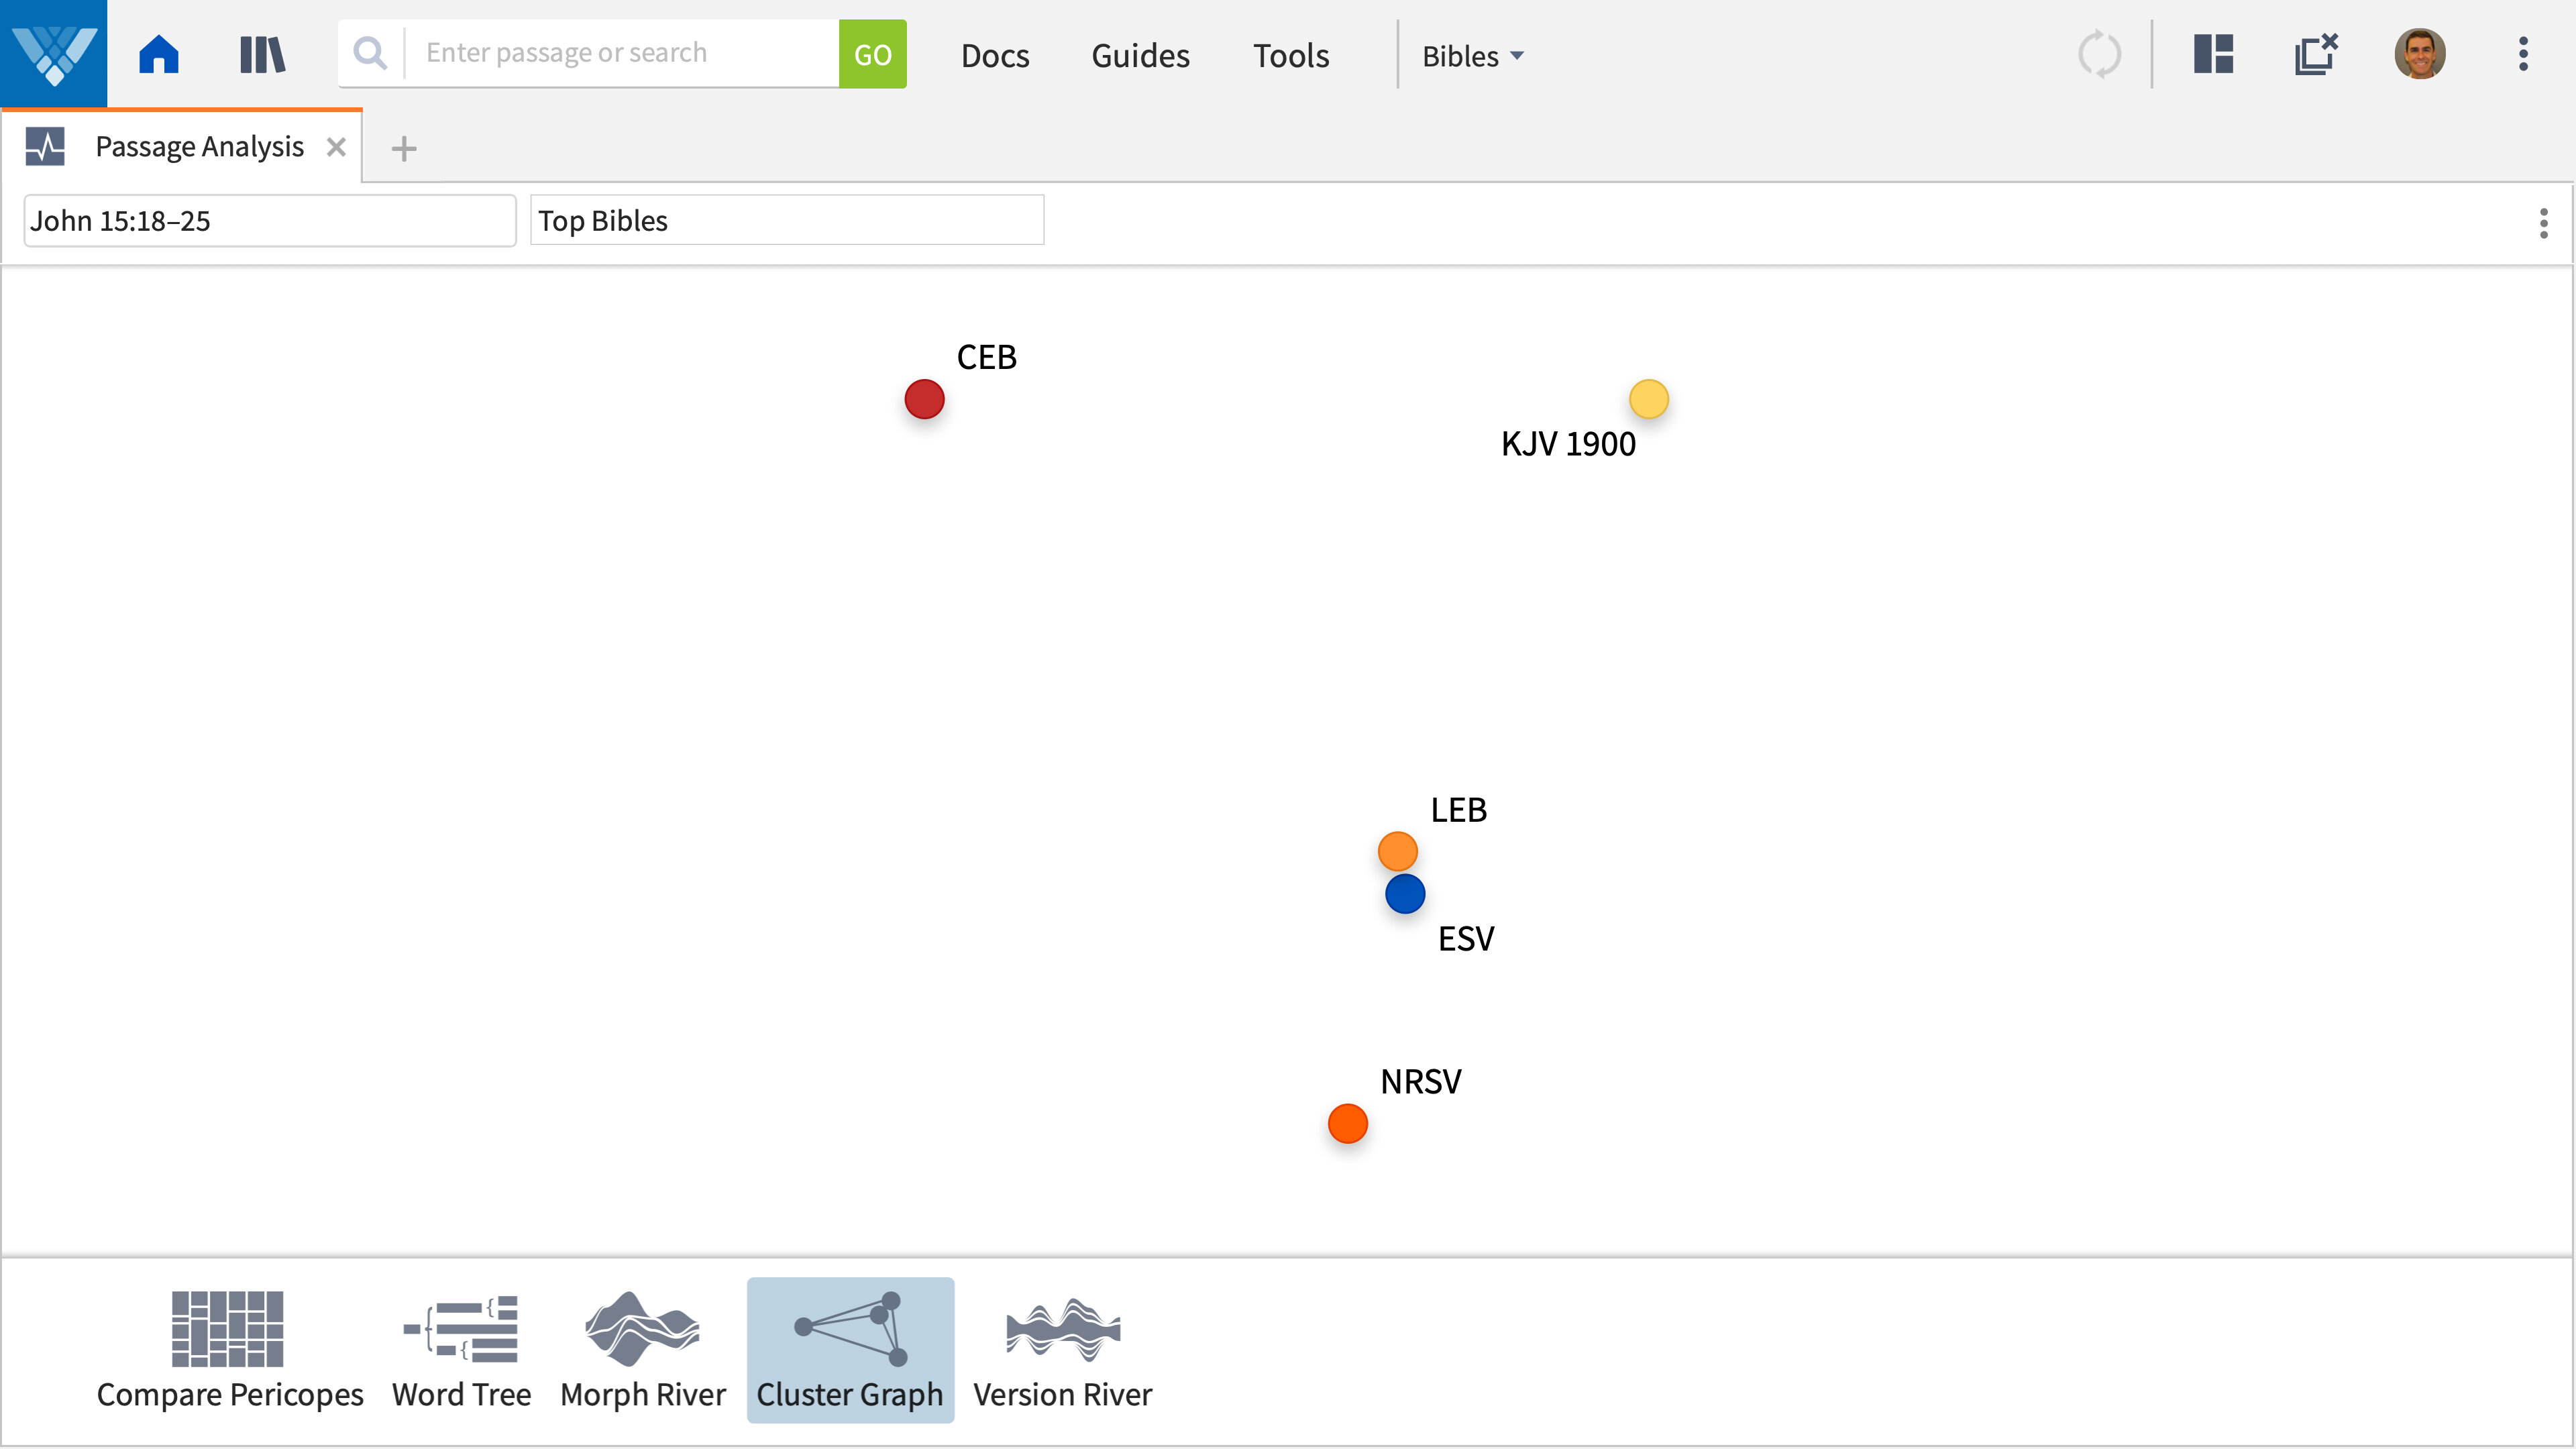 Cluster graph view